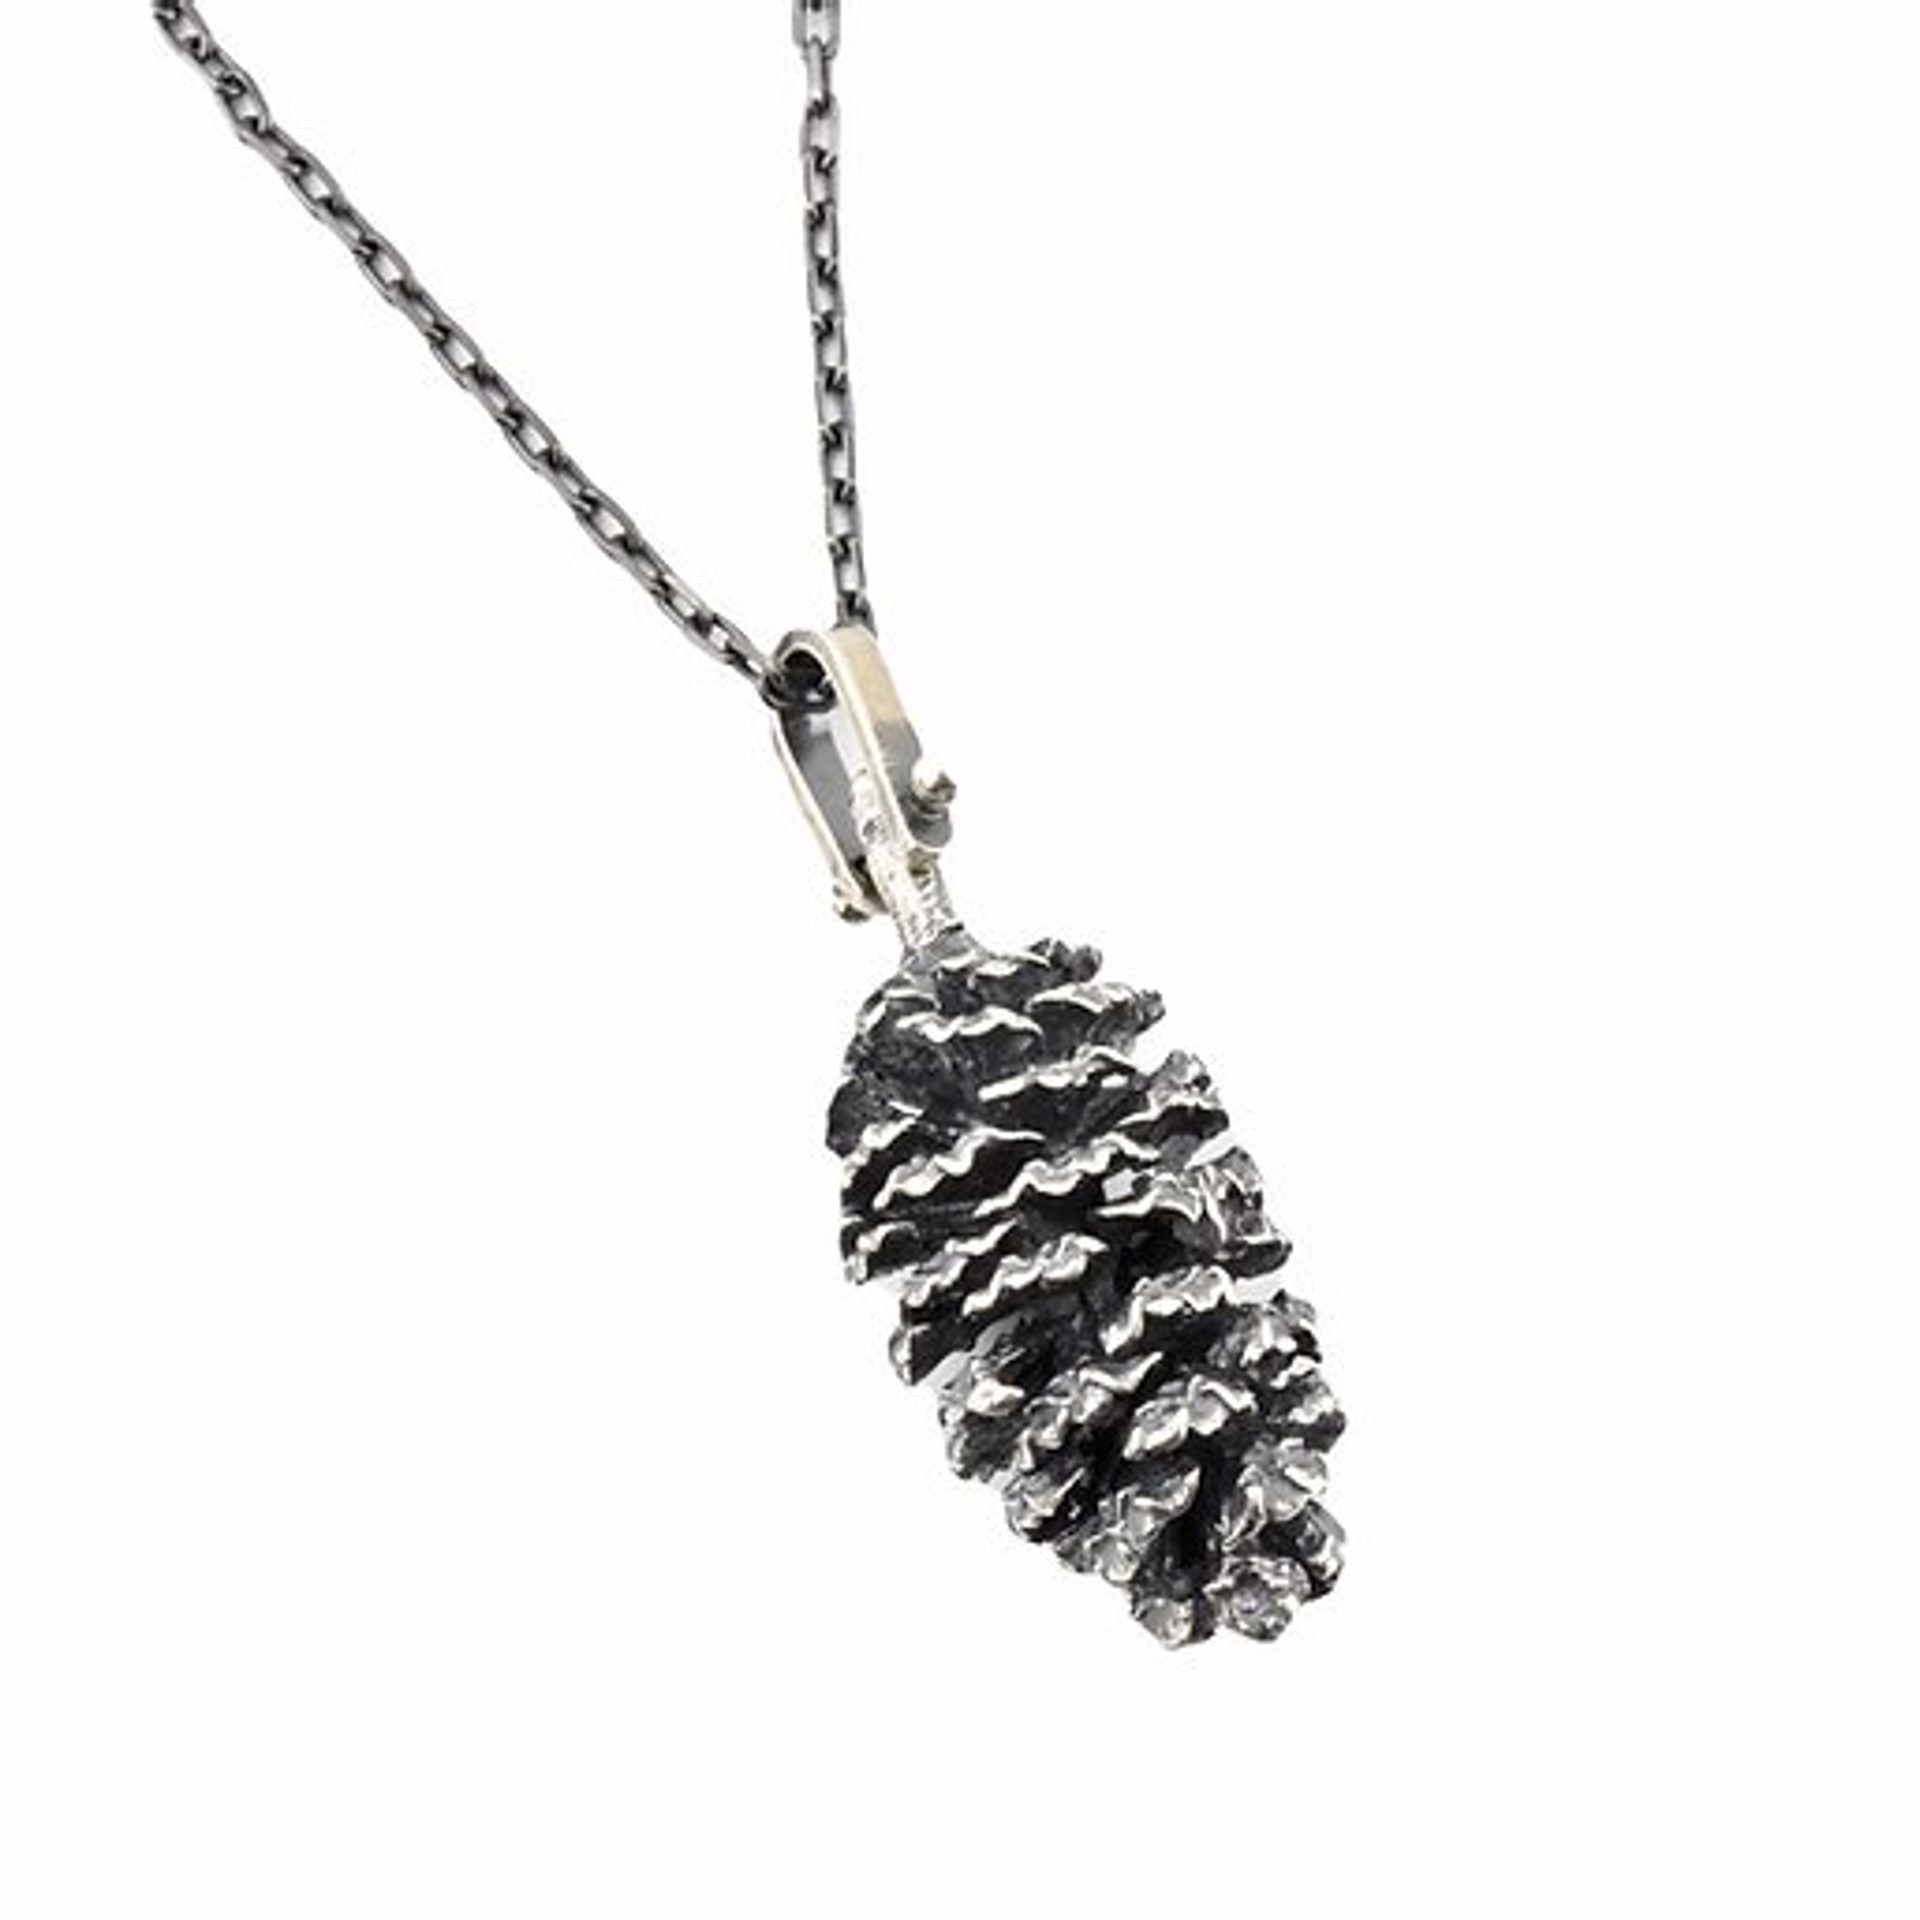 Alder Cone Hinged Pendant by April Ottey